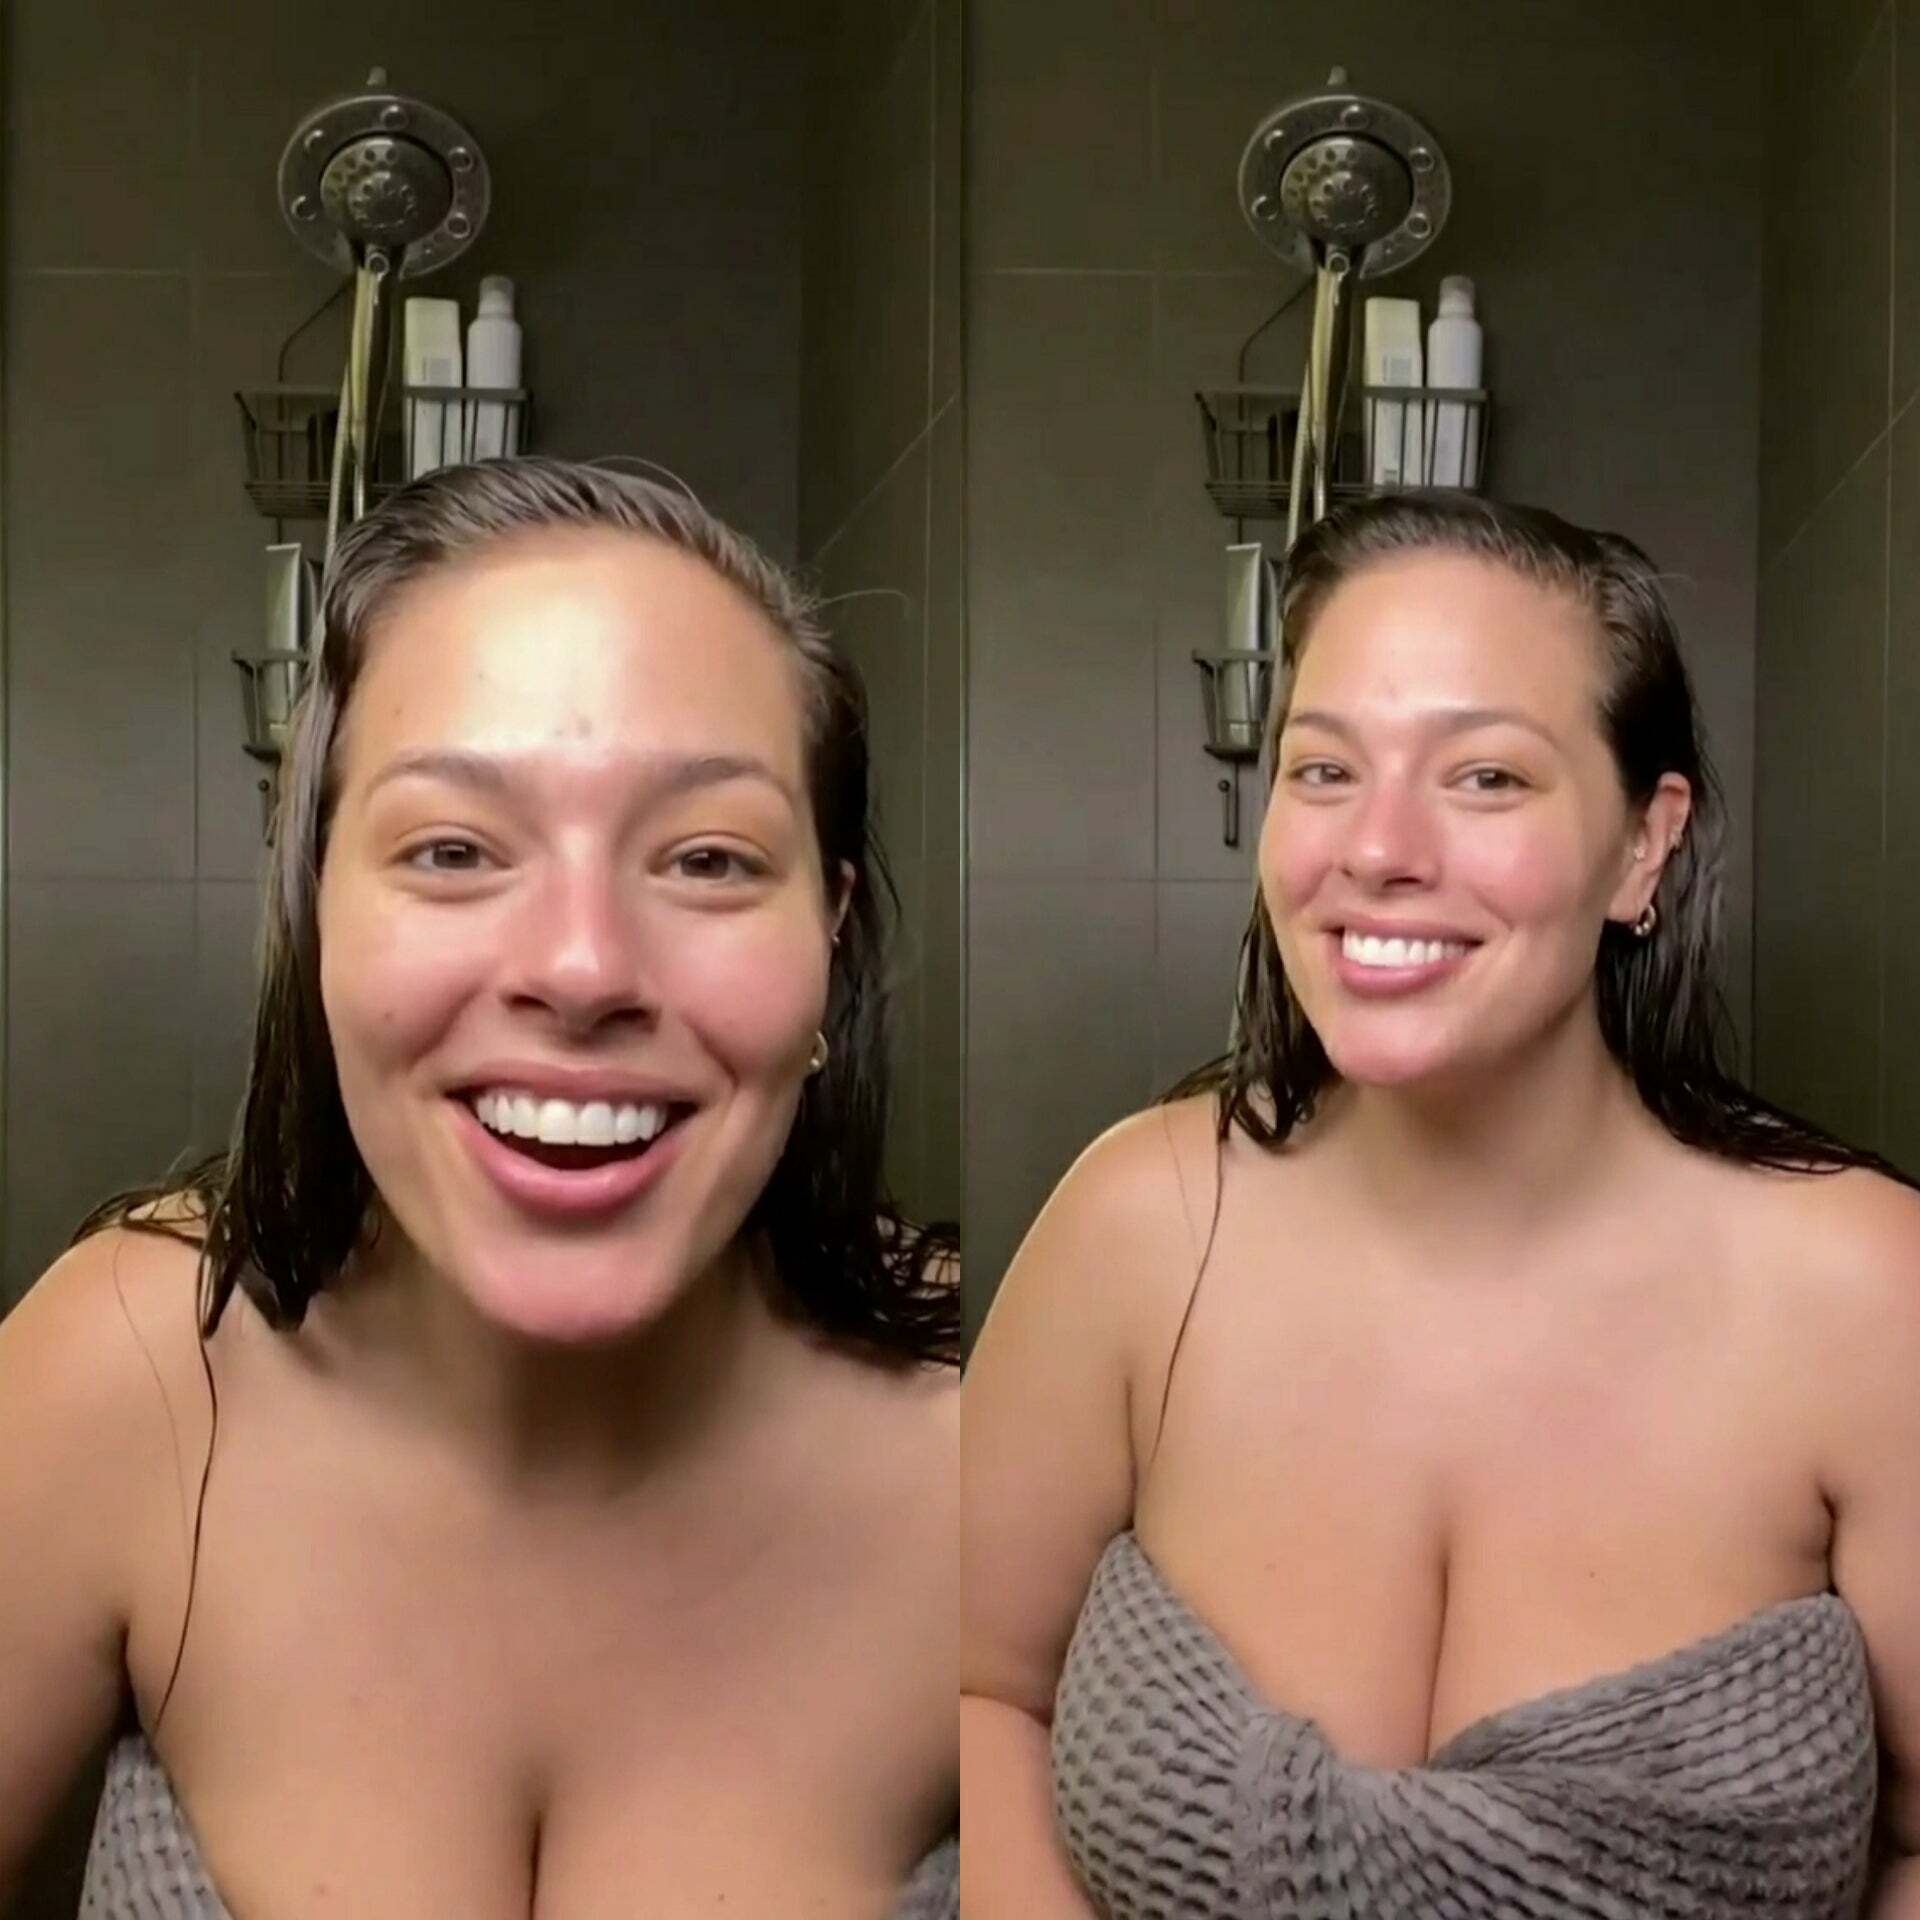 Id join with Ashley Graham in the shower